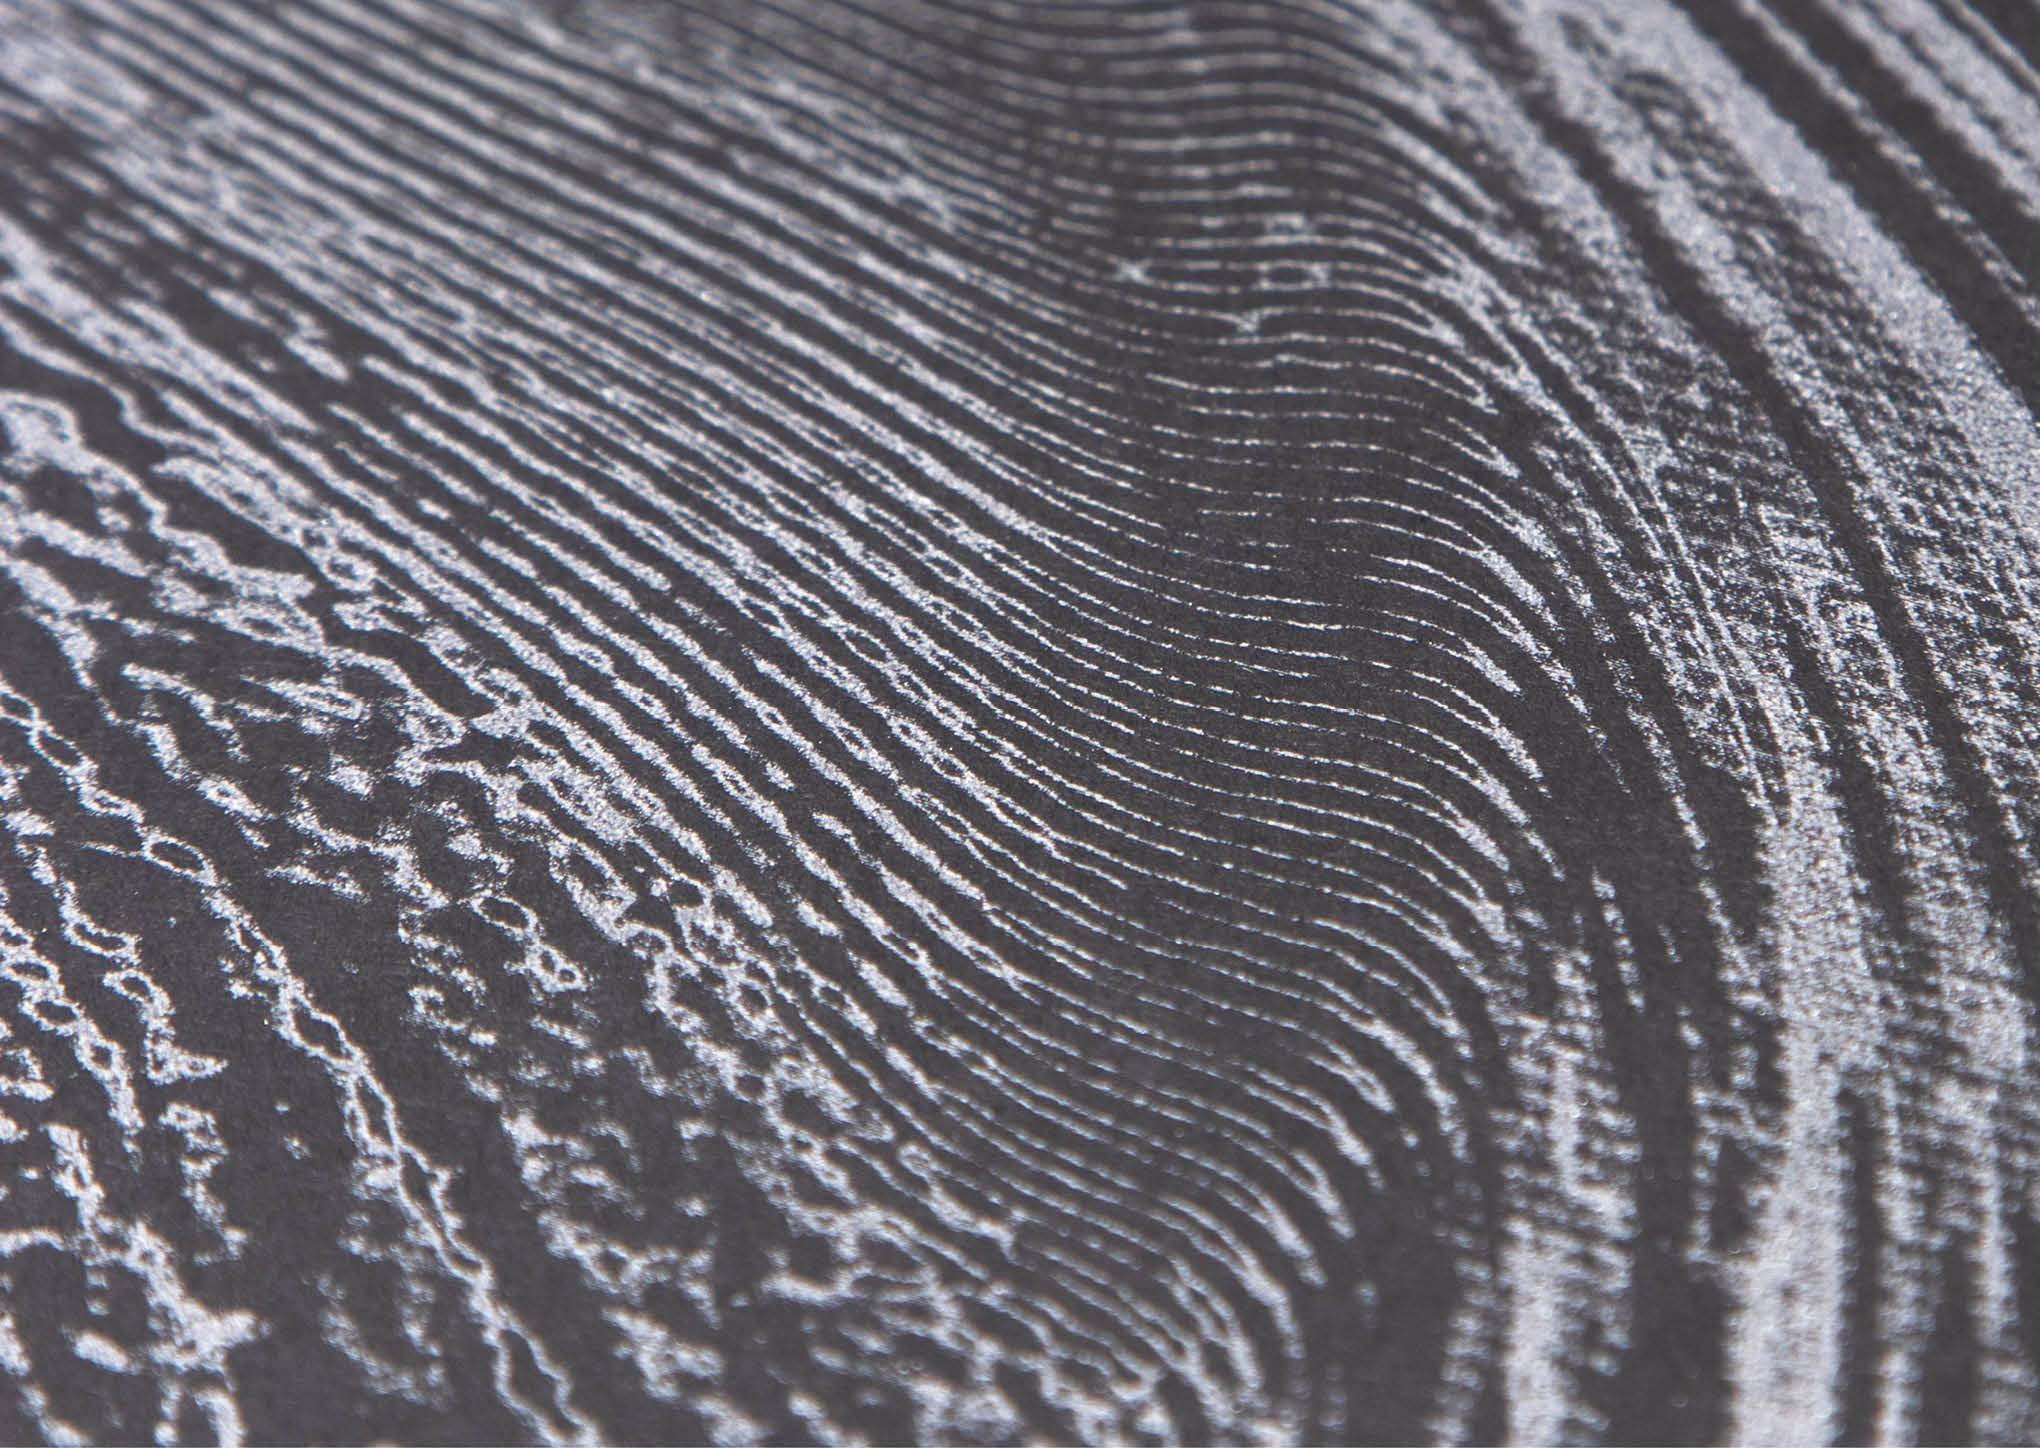 Through the process i decided, among other things, to screen print the resulting image with silver paint on black paper.